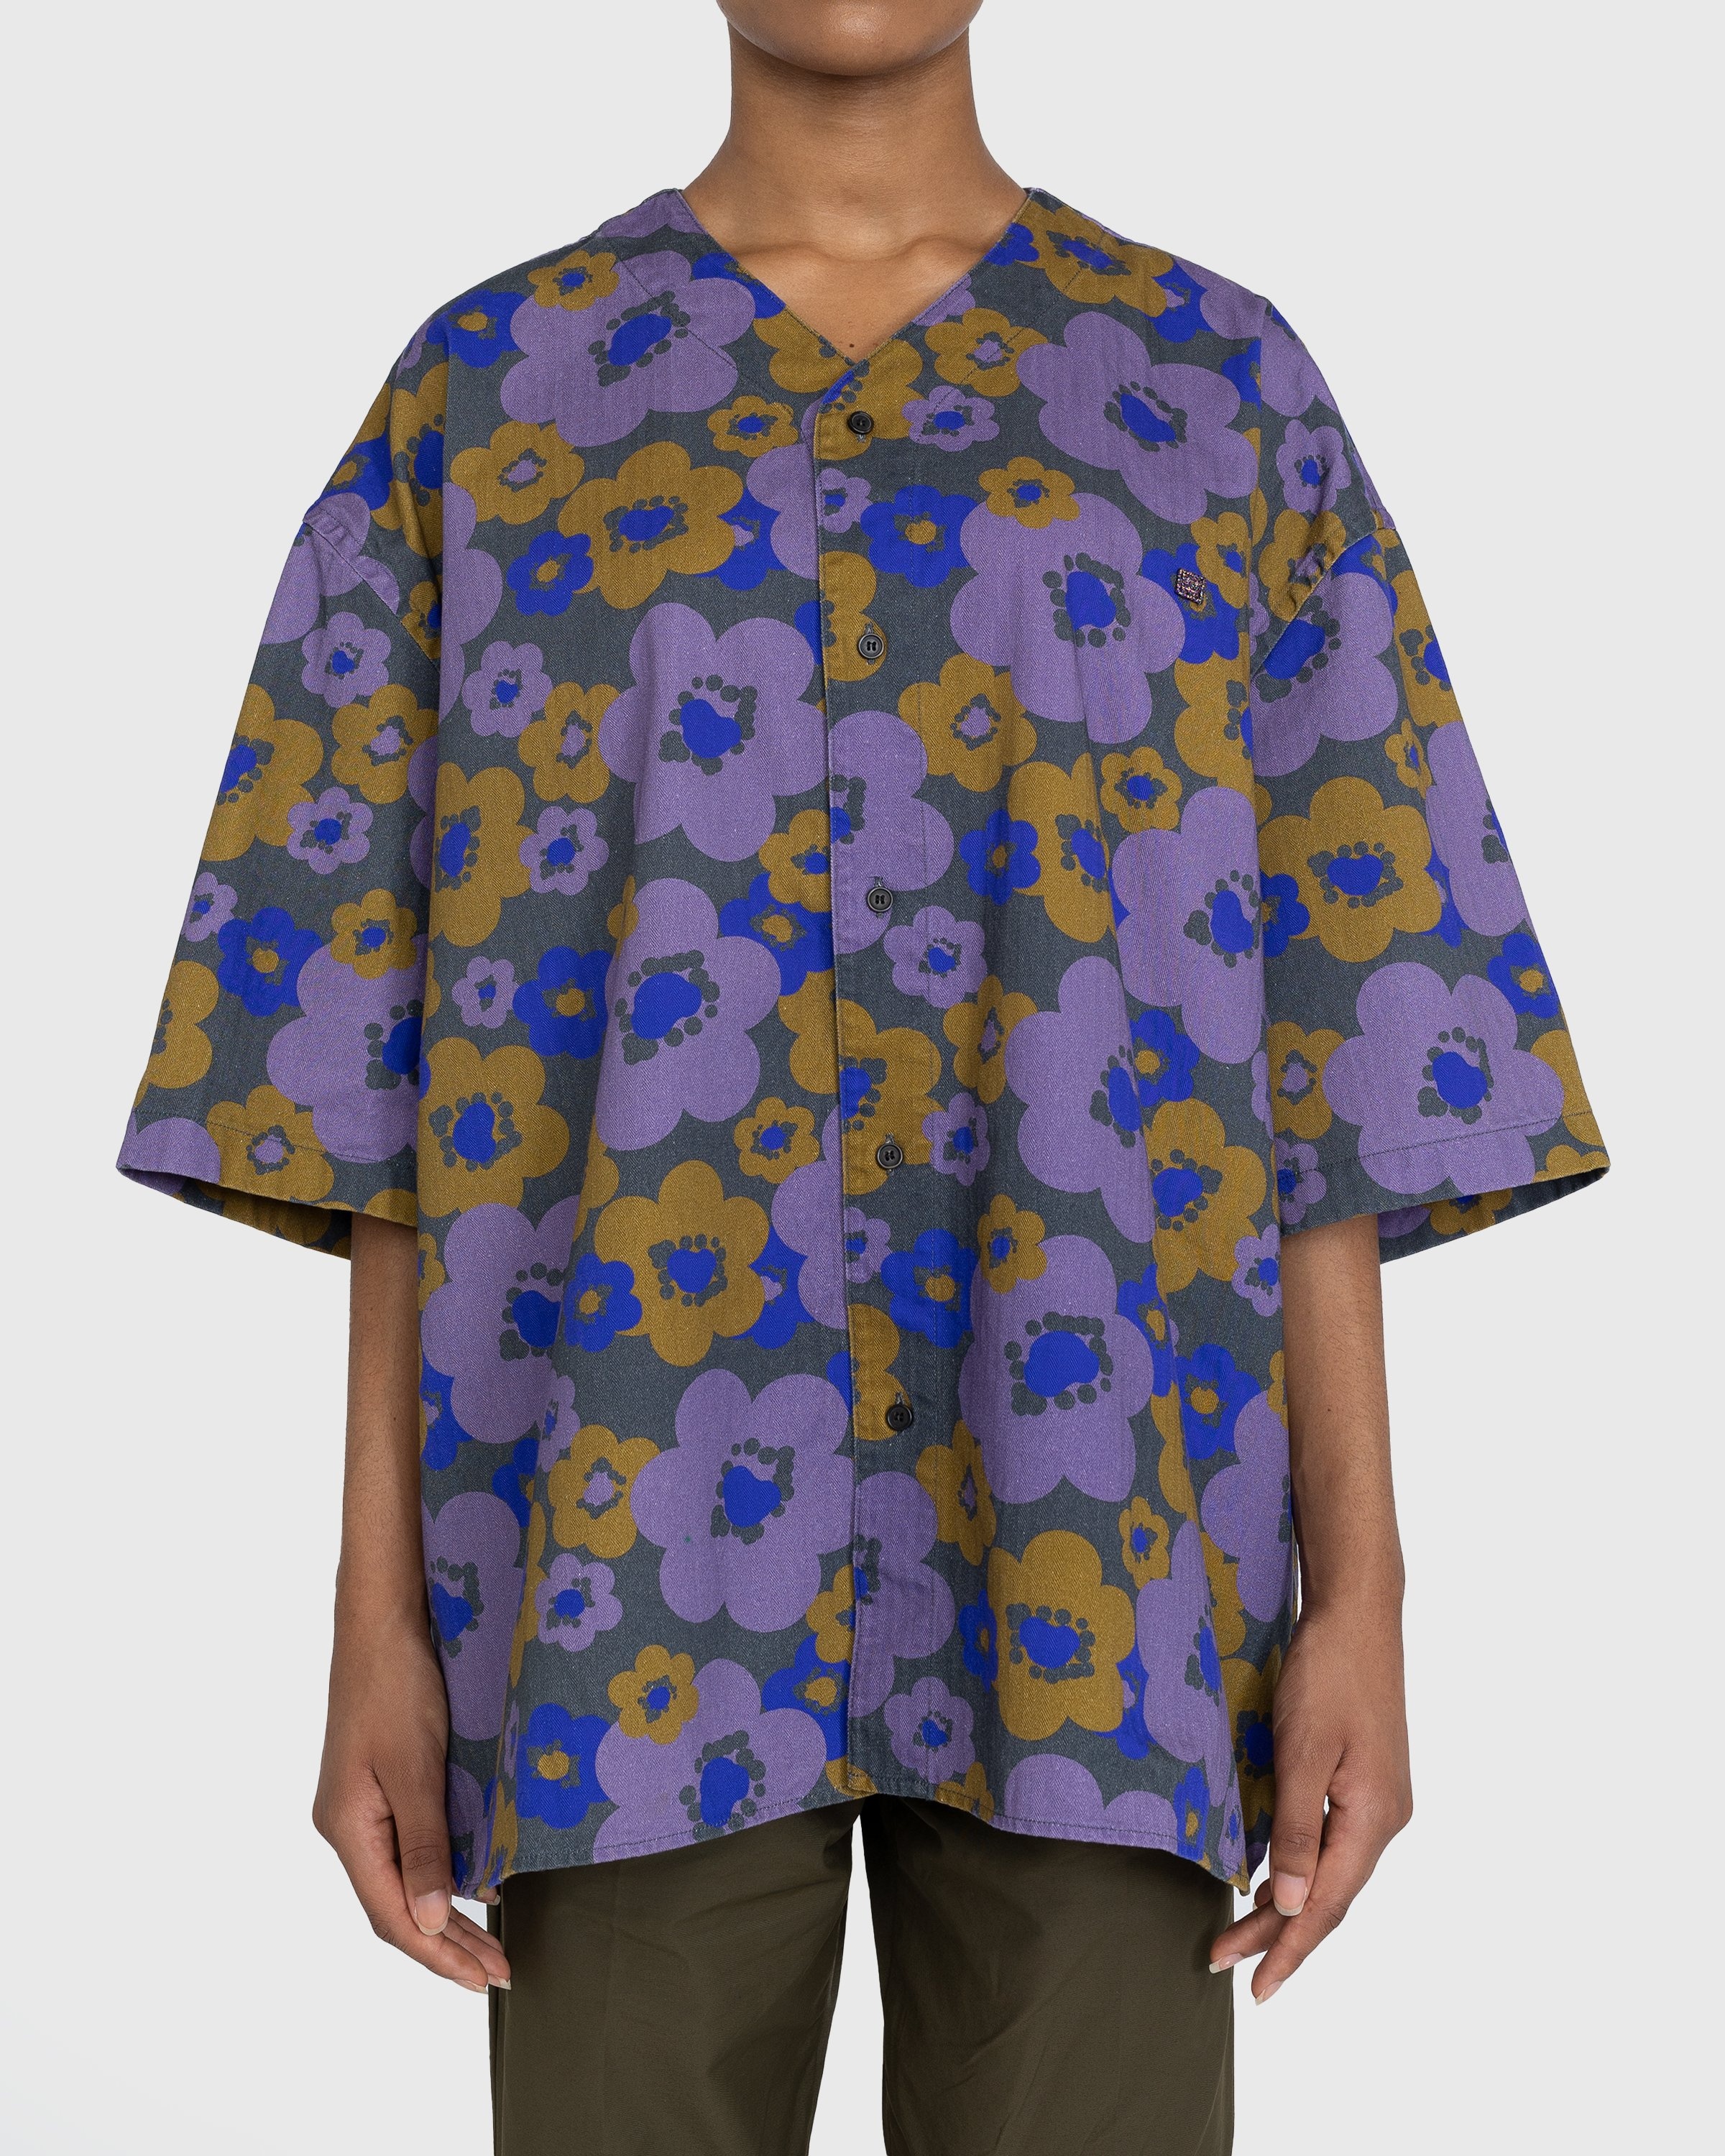 Acne Studios – Floral Short-Sleeve Button-Up Purple/Brown - Shortsleeve Shirts - Multi - Image 2